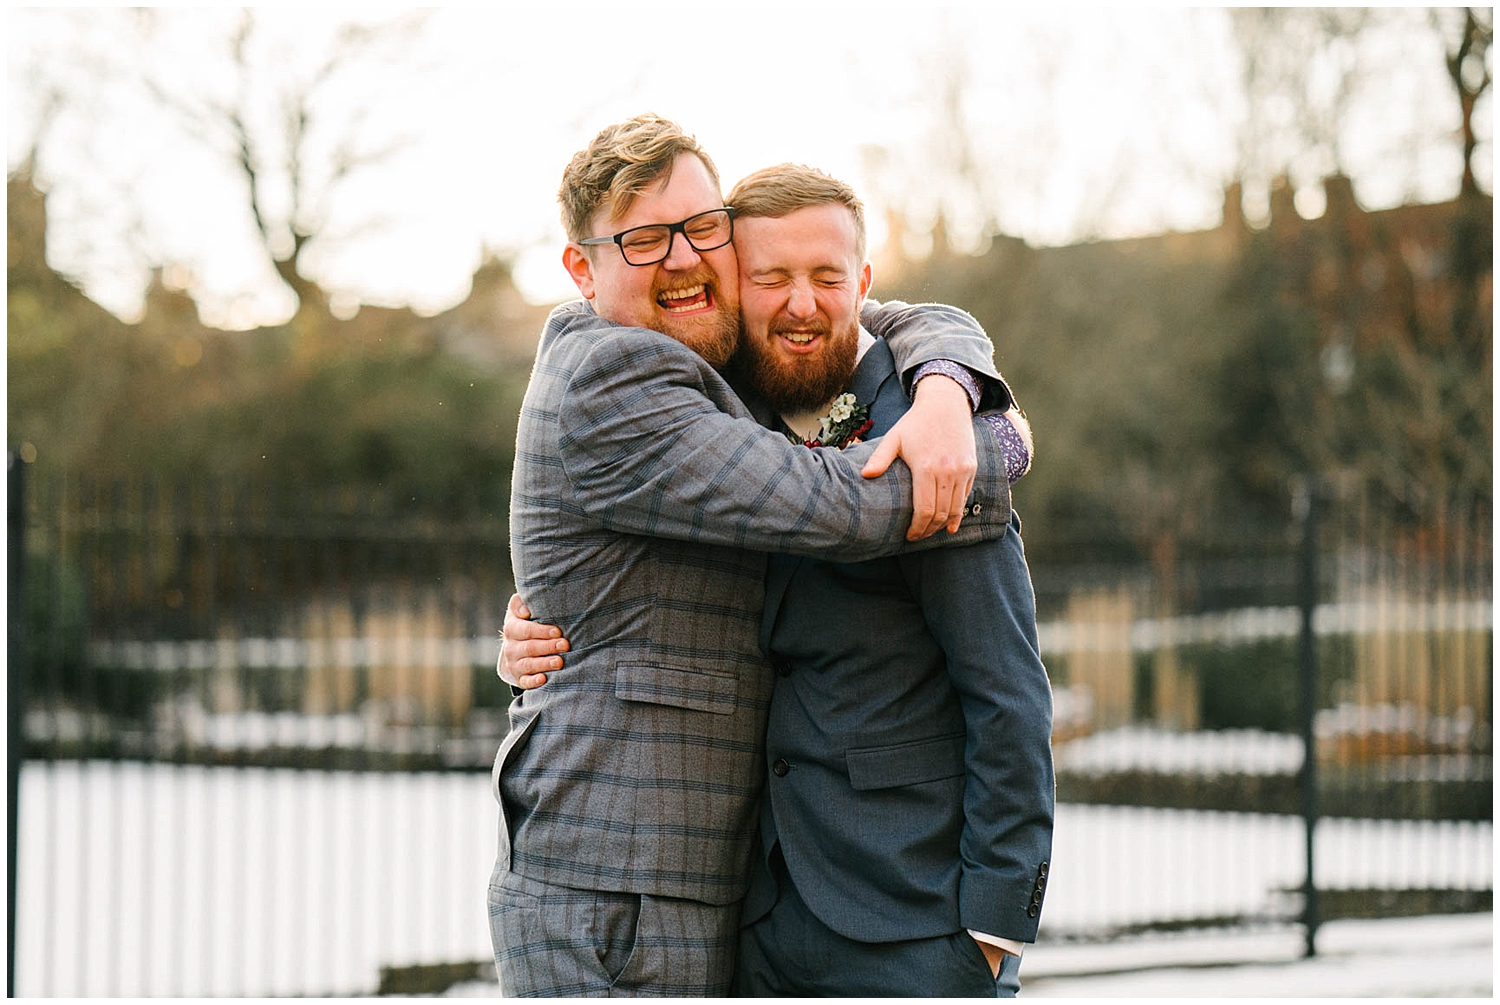 A big hug between friends right before a wedding at Halifax Registry Office. Photographed by Yorkshire Wedding Photographer Kari Bellamy. 